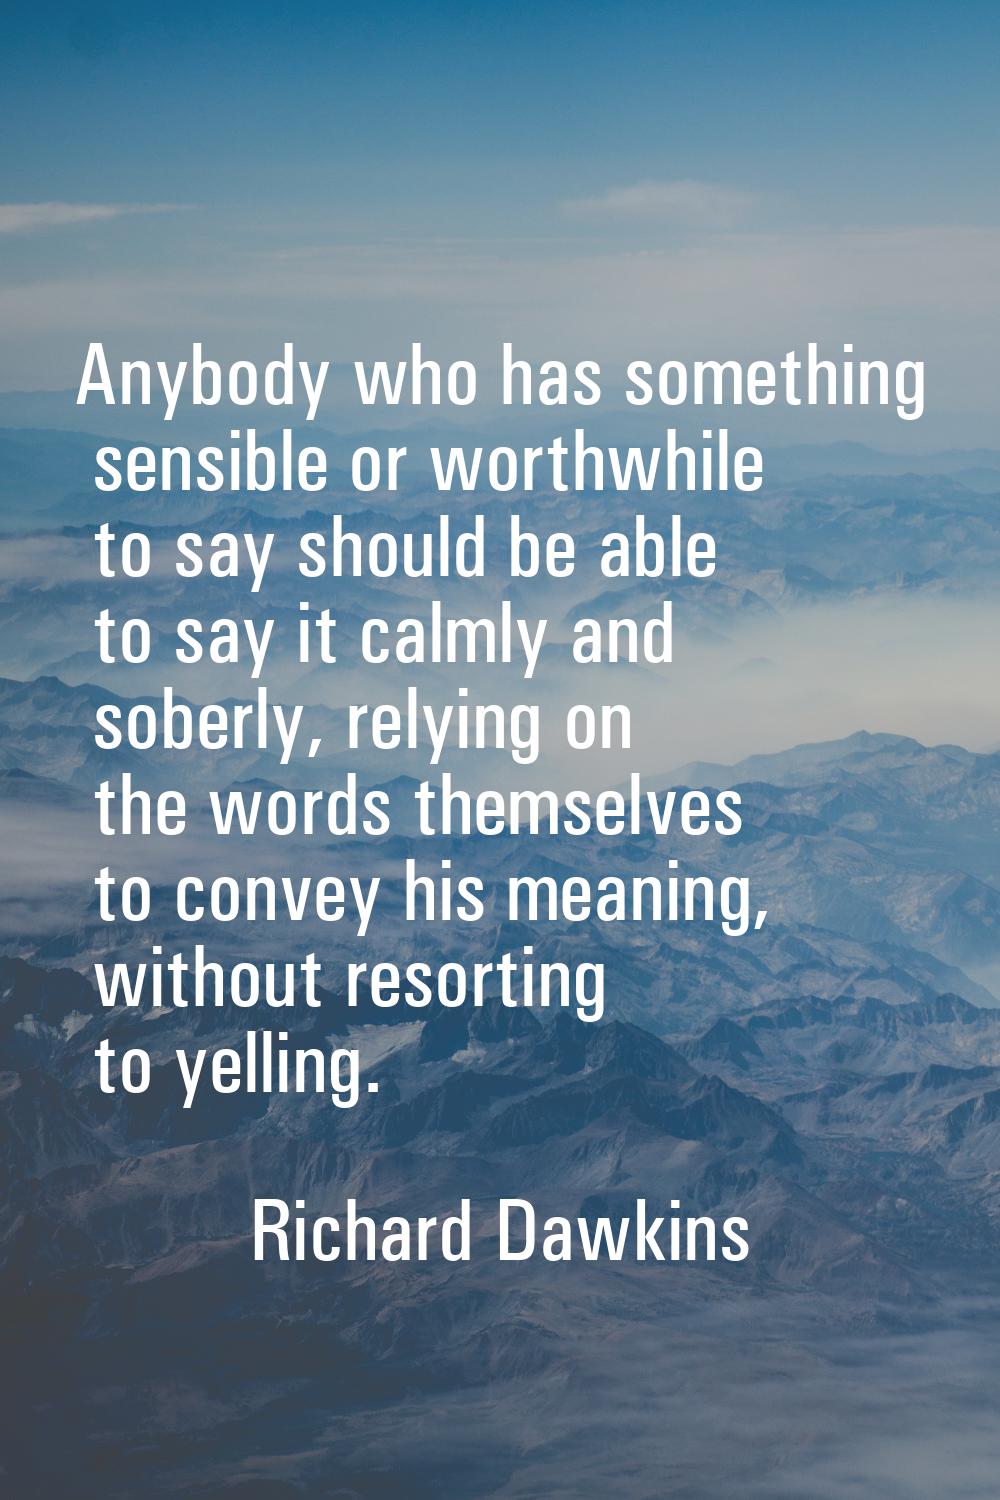 Anybody who has something sensible or worthwhile to say should be able to say it calmly and soberly